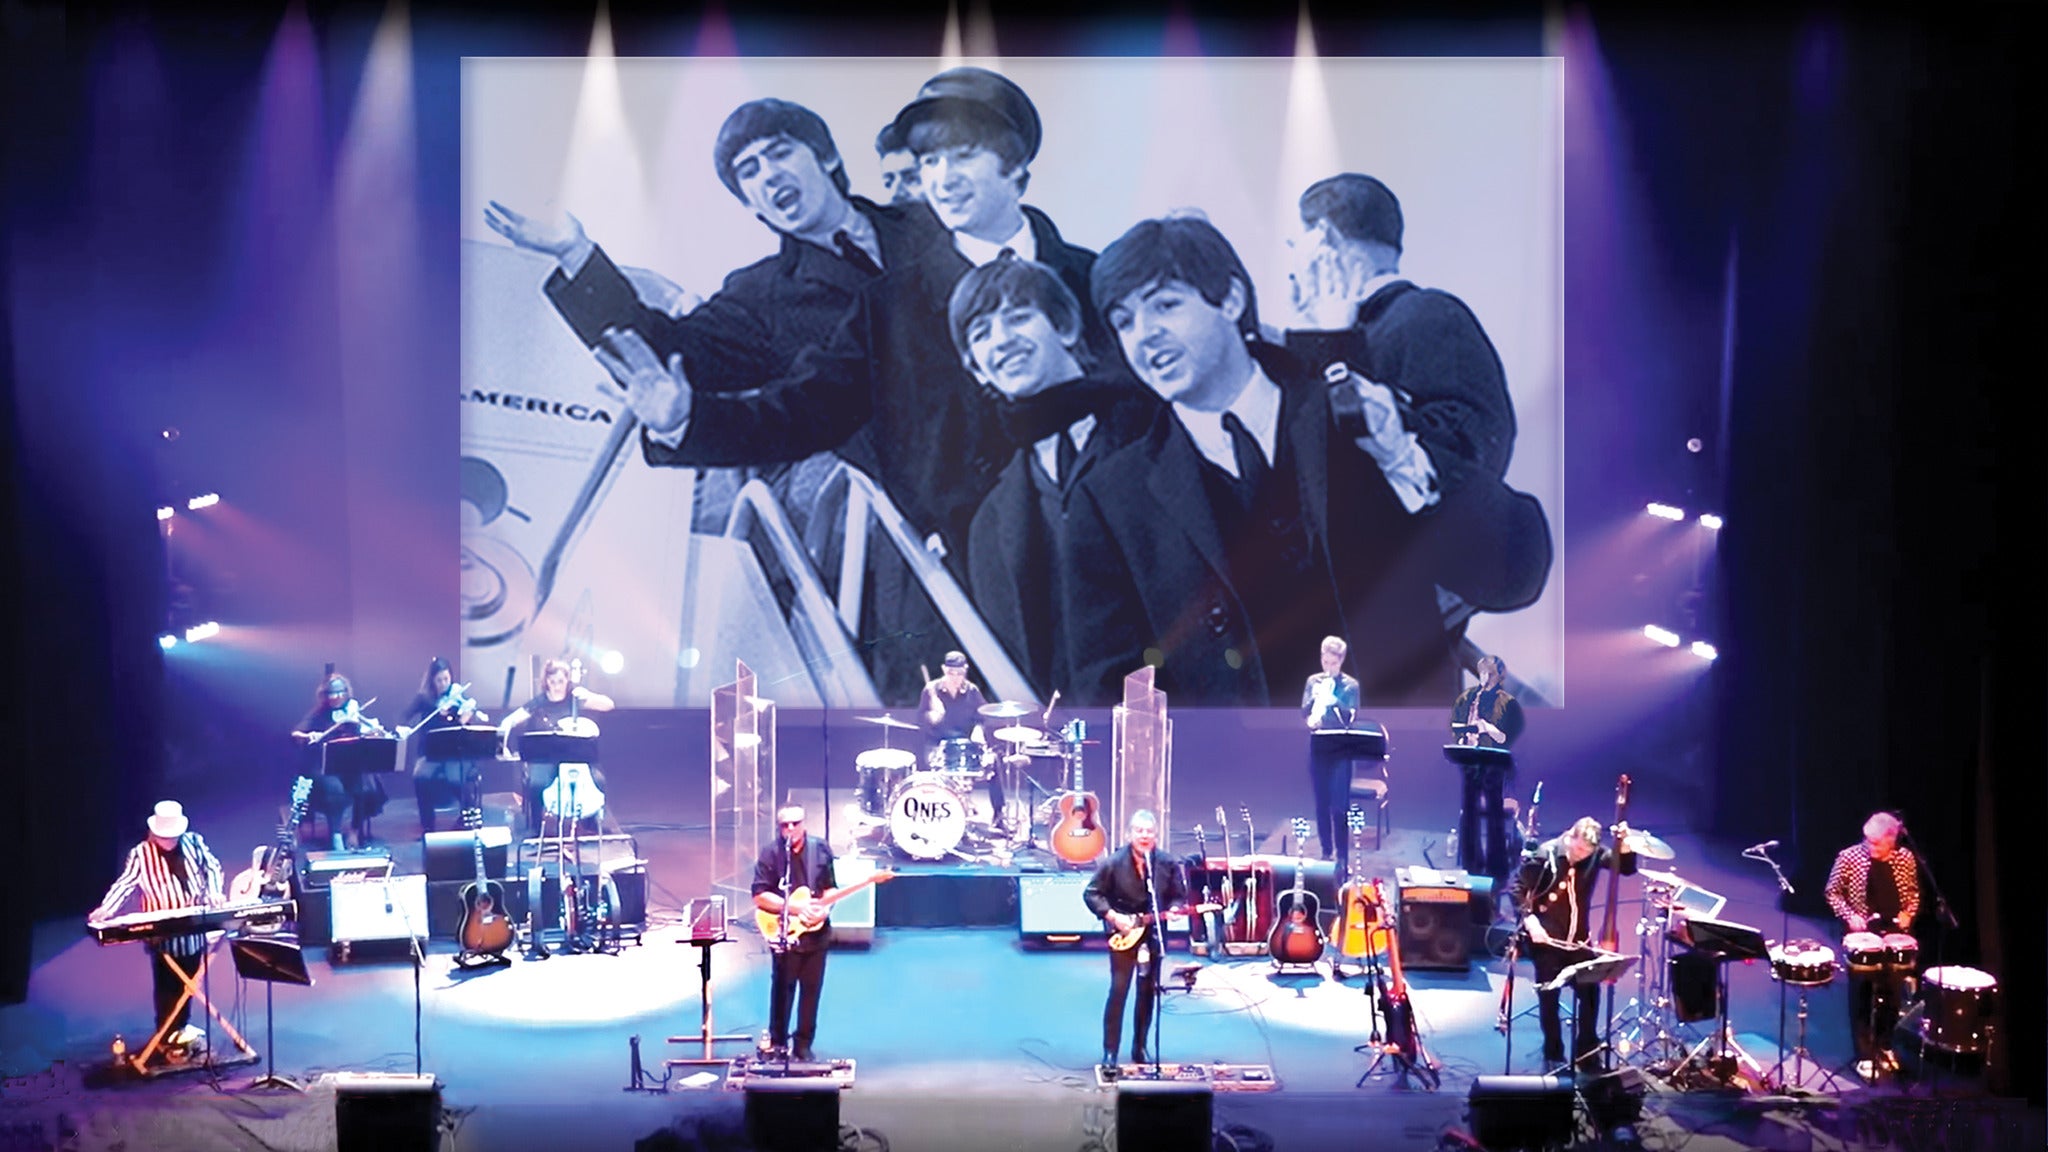 Ones - The Beatles #1 Hits pre-sale code for show tickets in Hamilton, ON (FirstOntario Concert Hall)